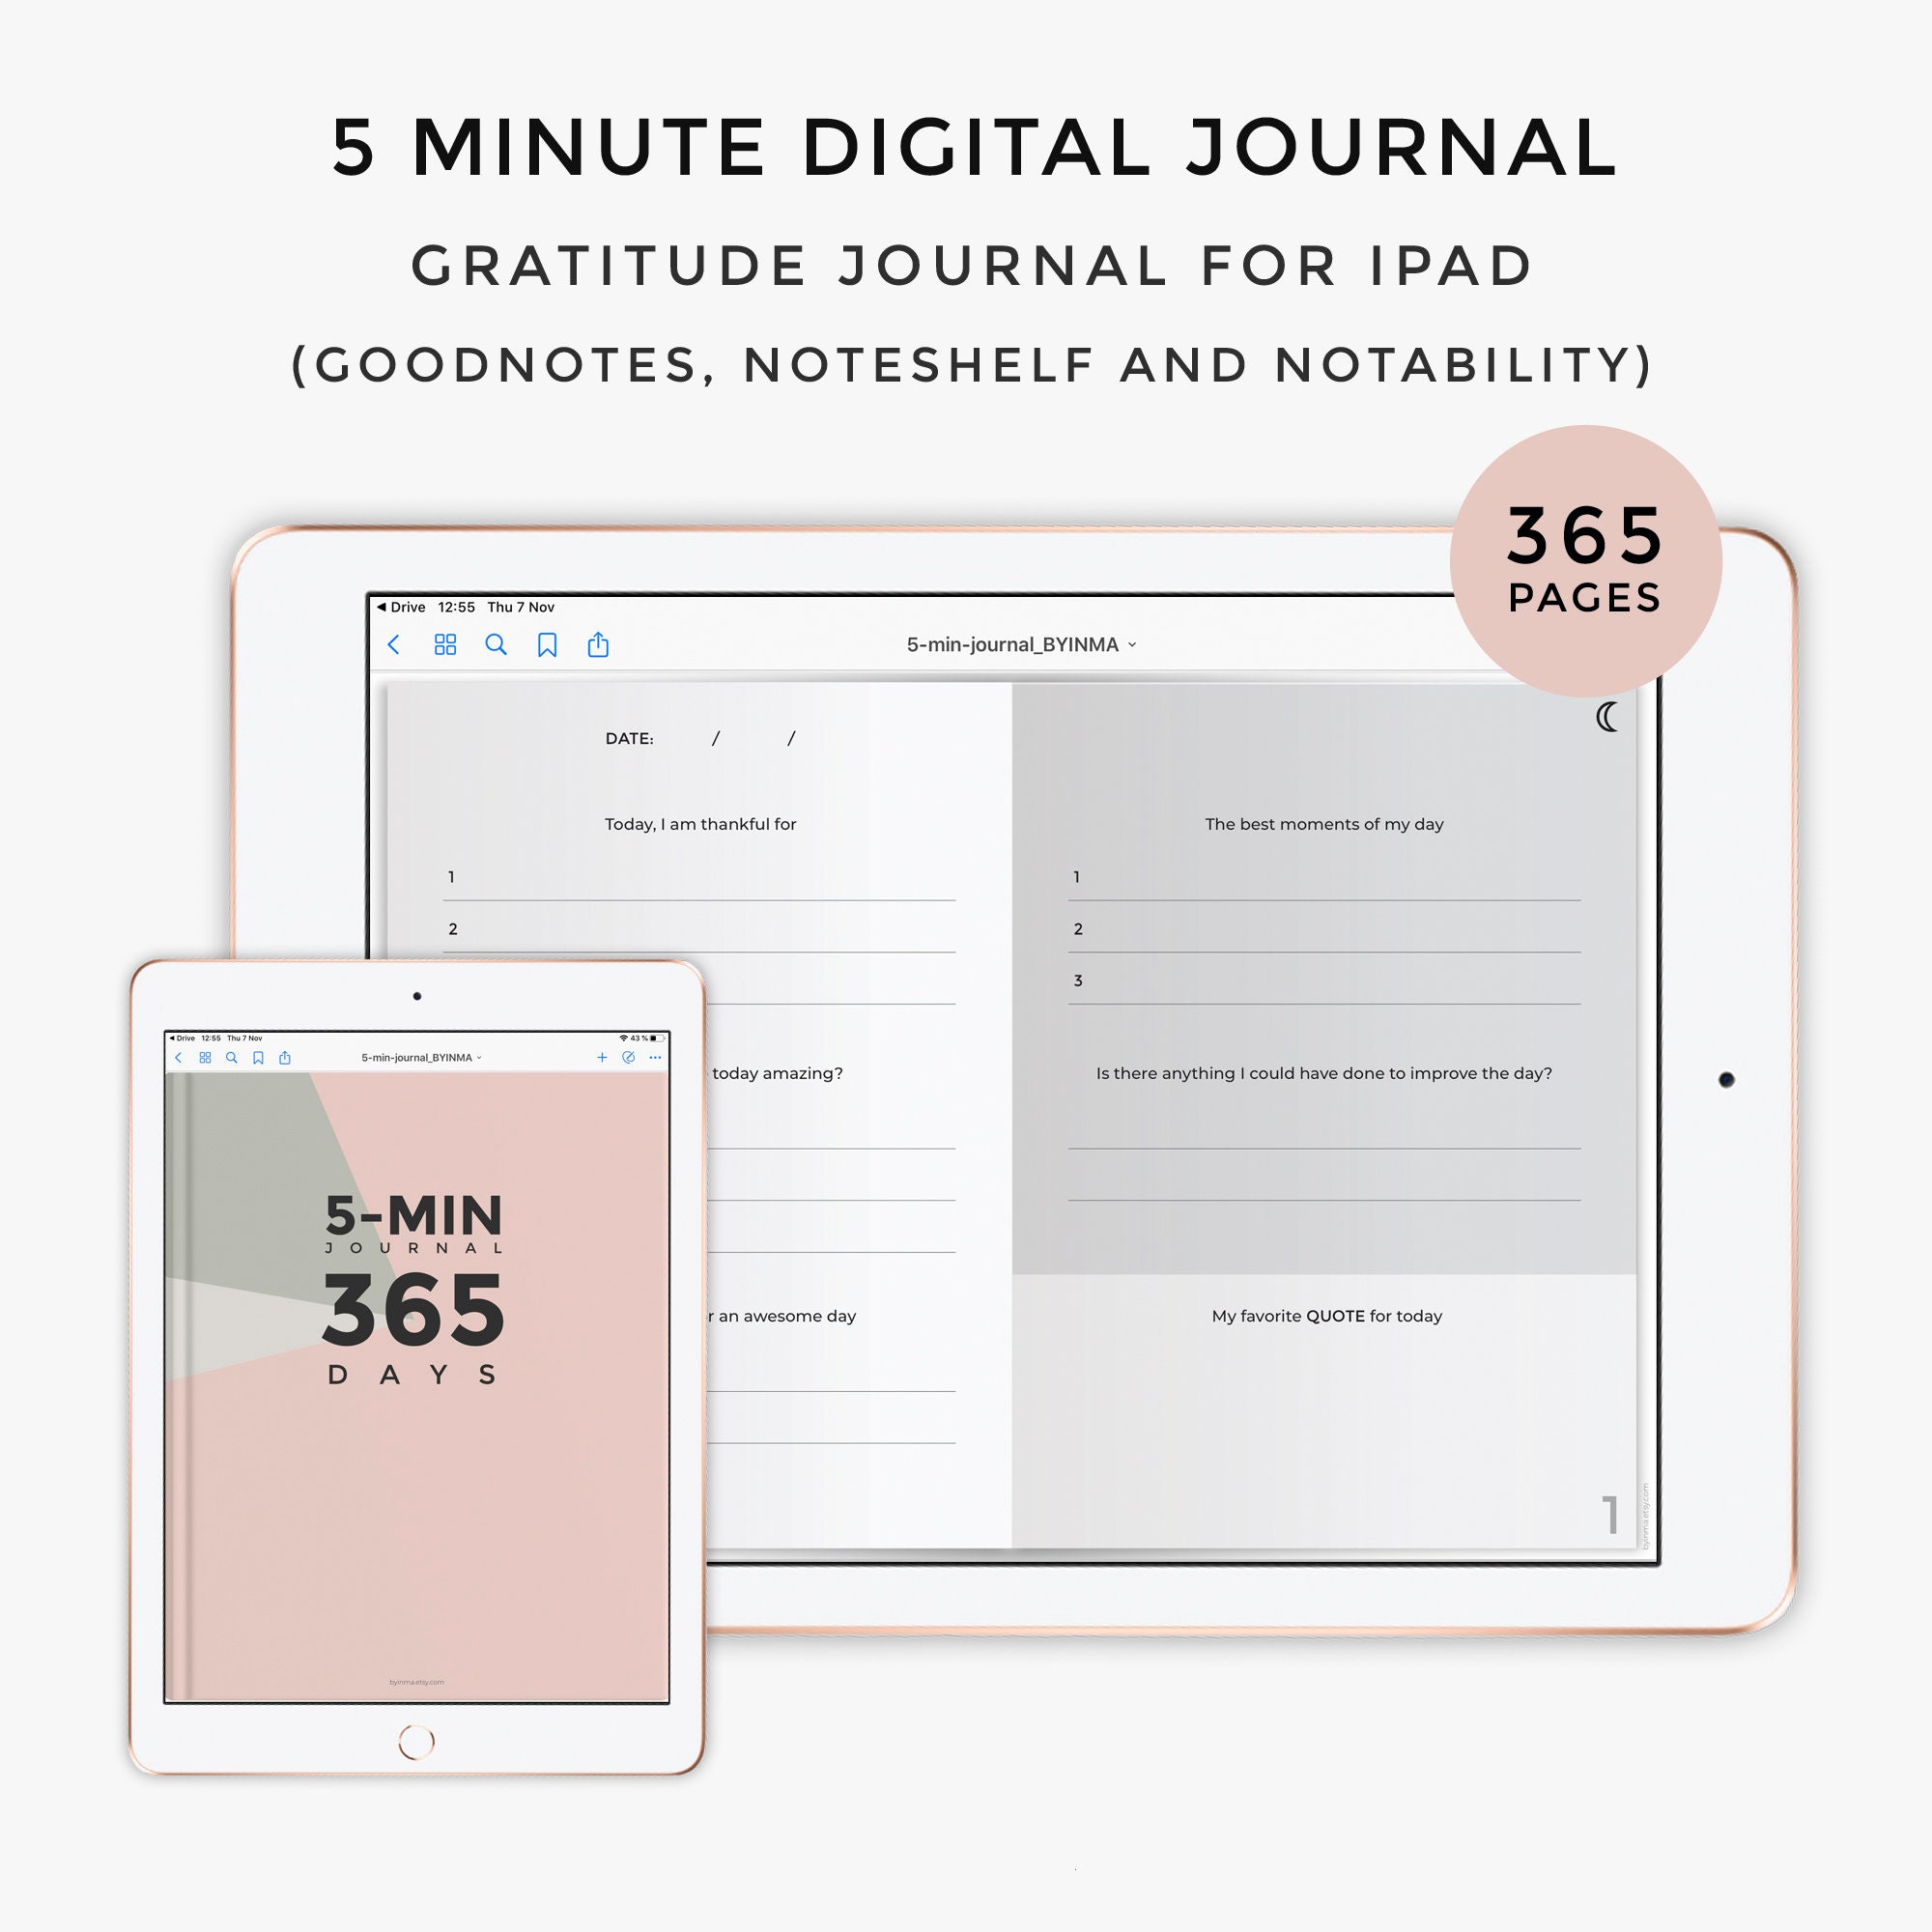 Gratitude Journal Digital. 5 Minute Journal for iPad Pro With 365 Pages and  Index With Hyperlinks. for Goodnotes, Notability & Noteshelf 